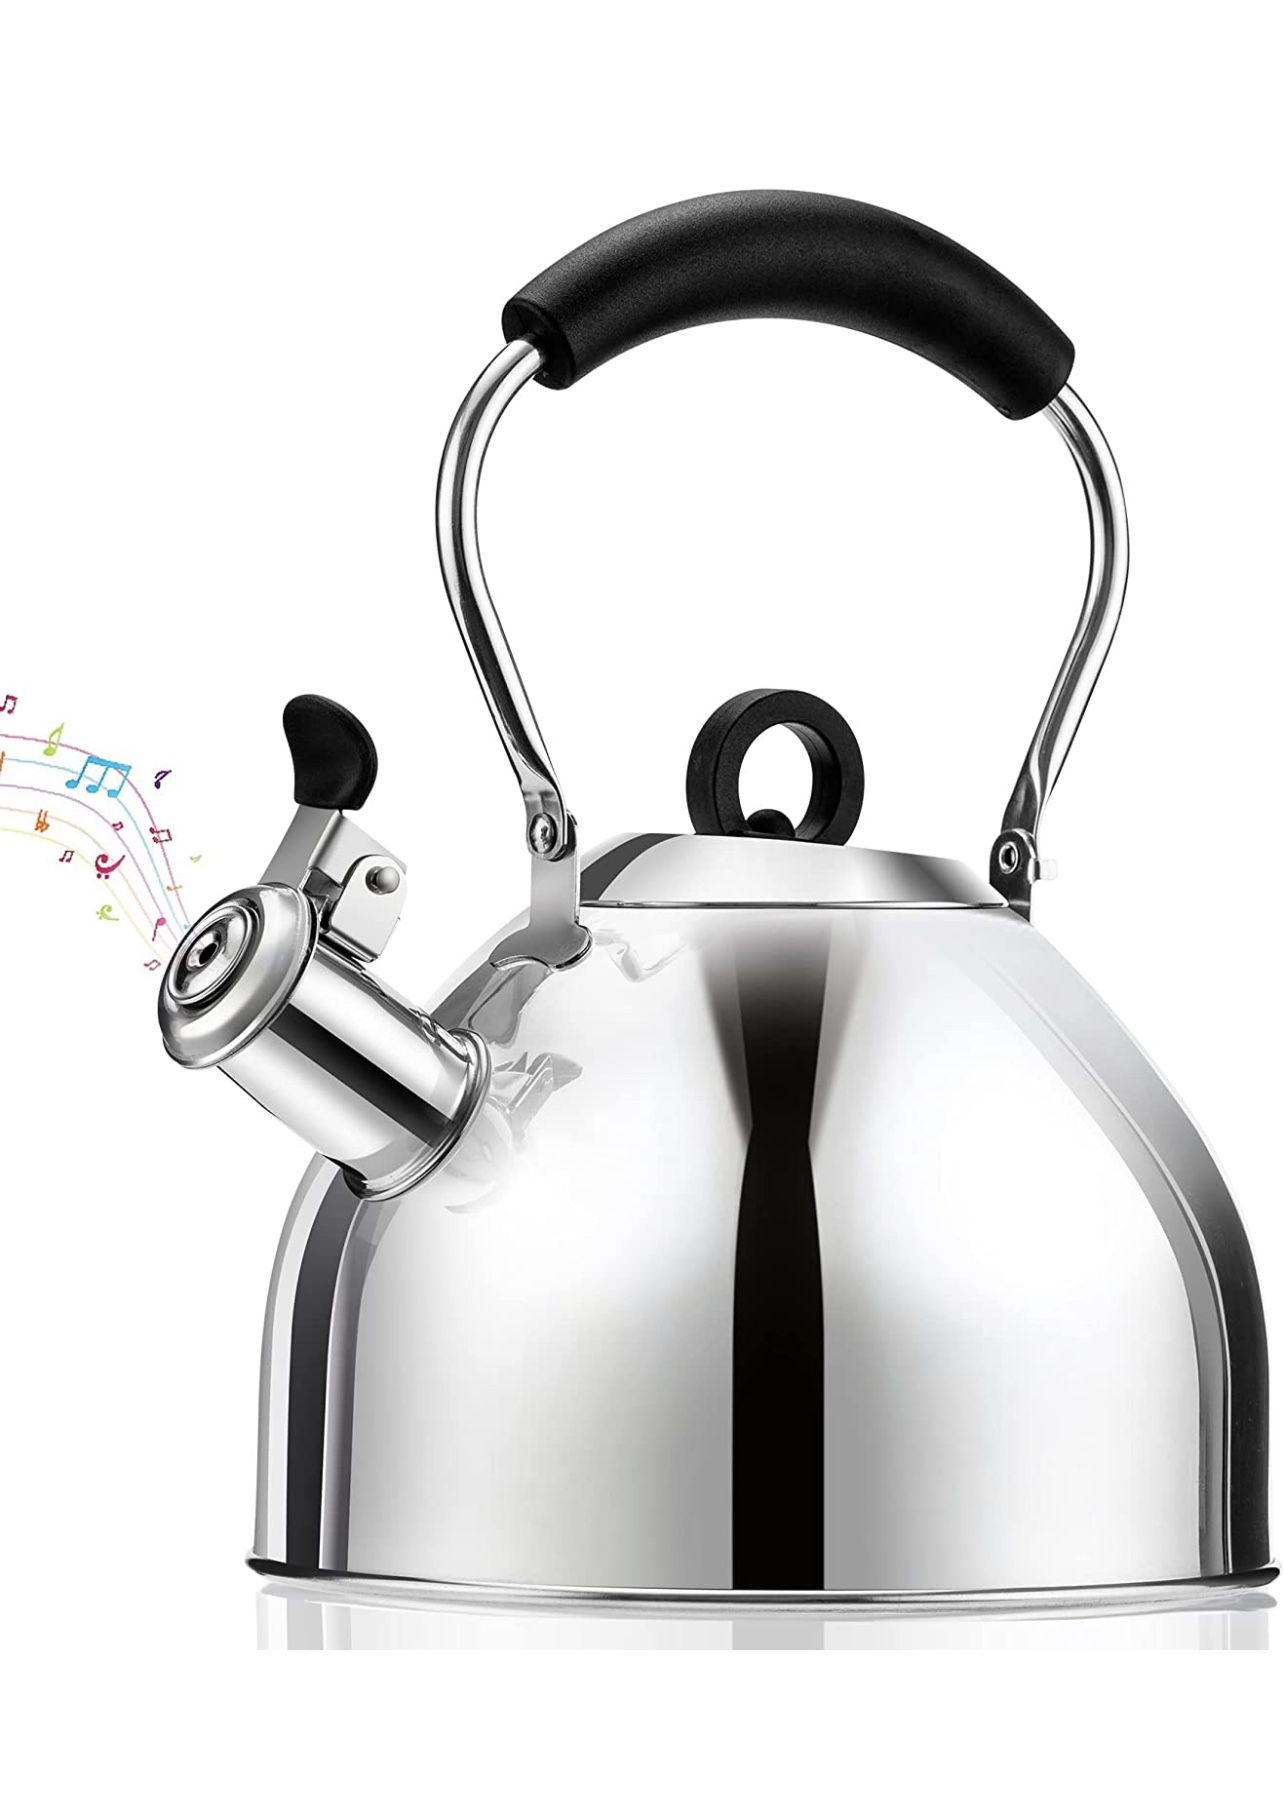 Tea Kettle Stovetop - HIHUOS 2.64QT Whistling Tea Pots for Stove Top - Sleek Teapots with Universal Base, Mirror Stainless Steel Teakettle with Cool G